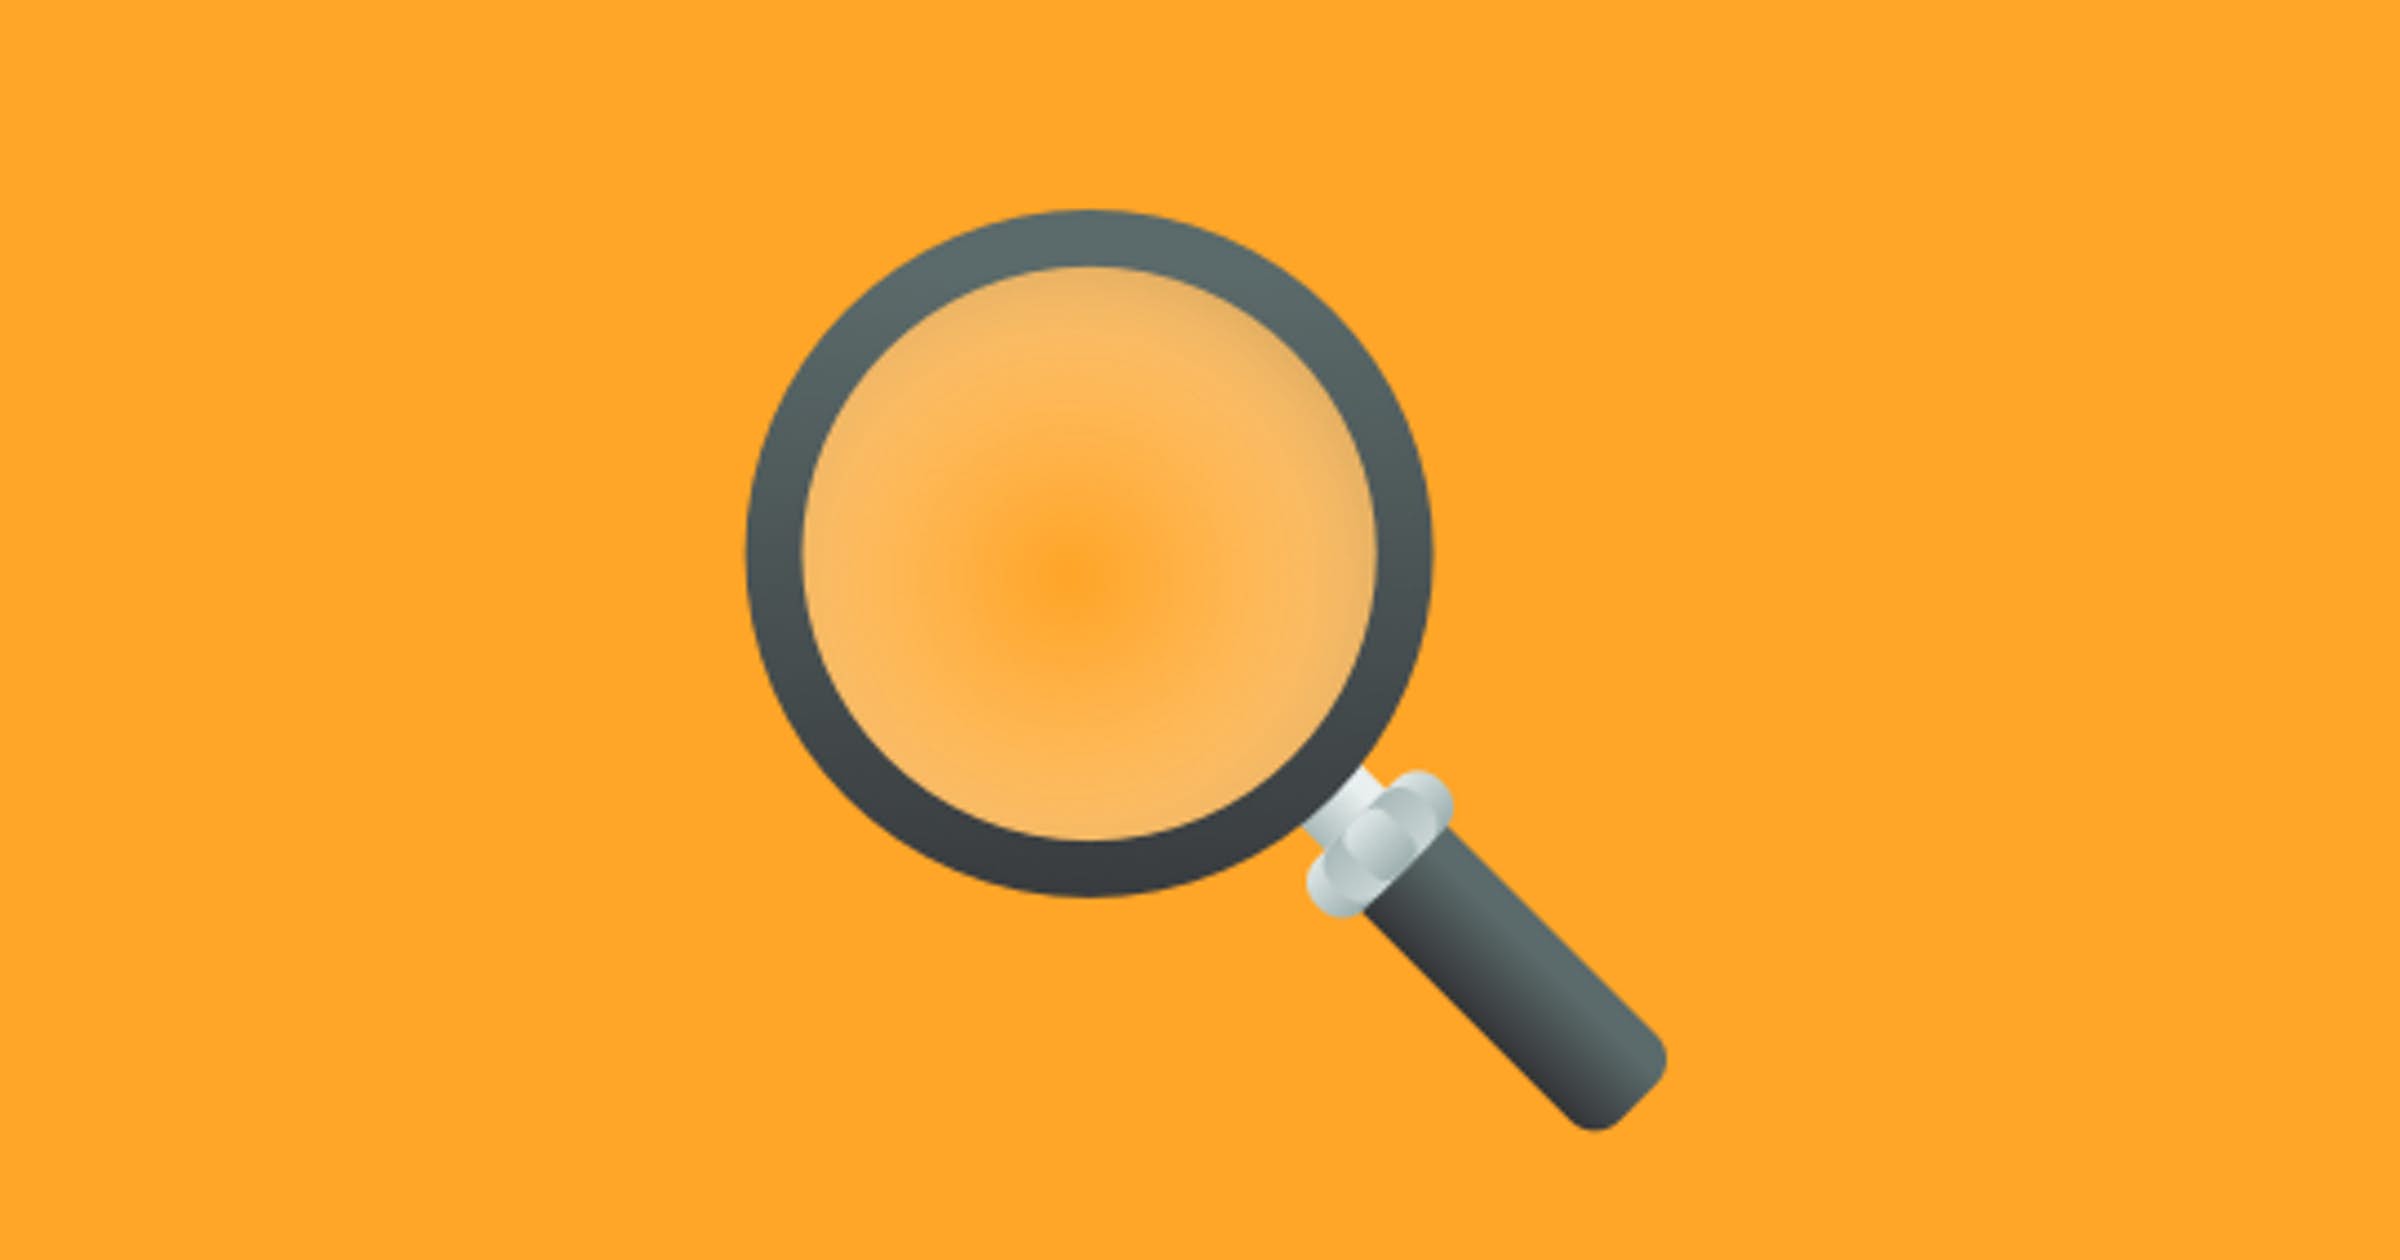 A magnifying glass against an orange background